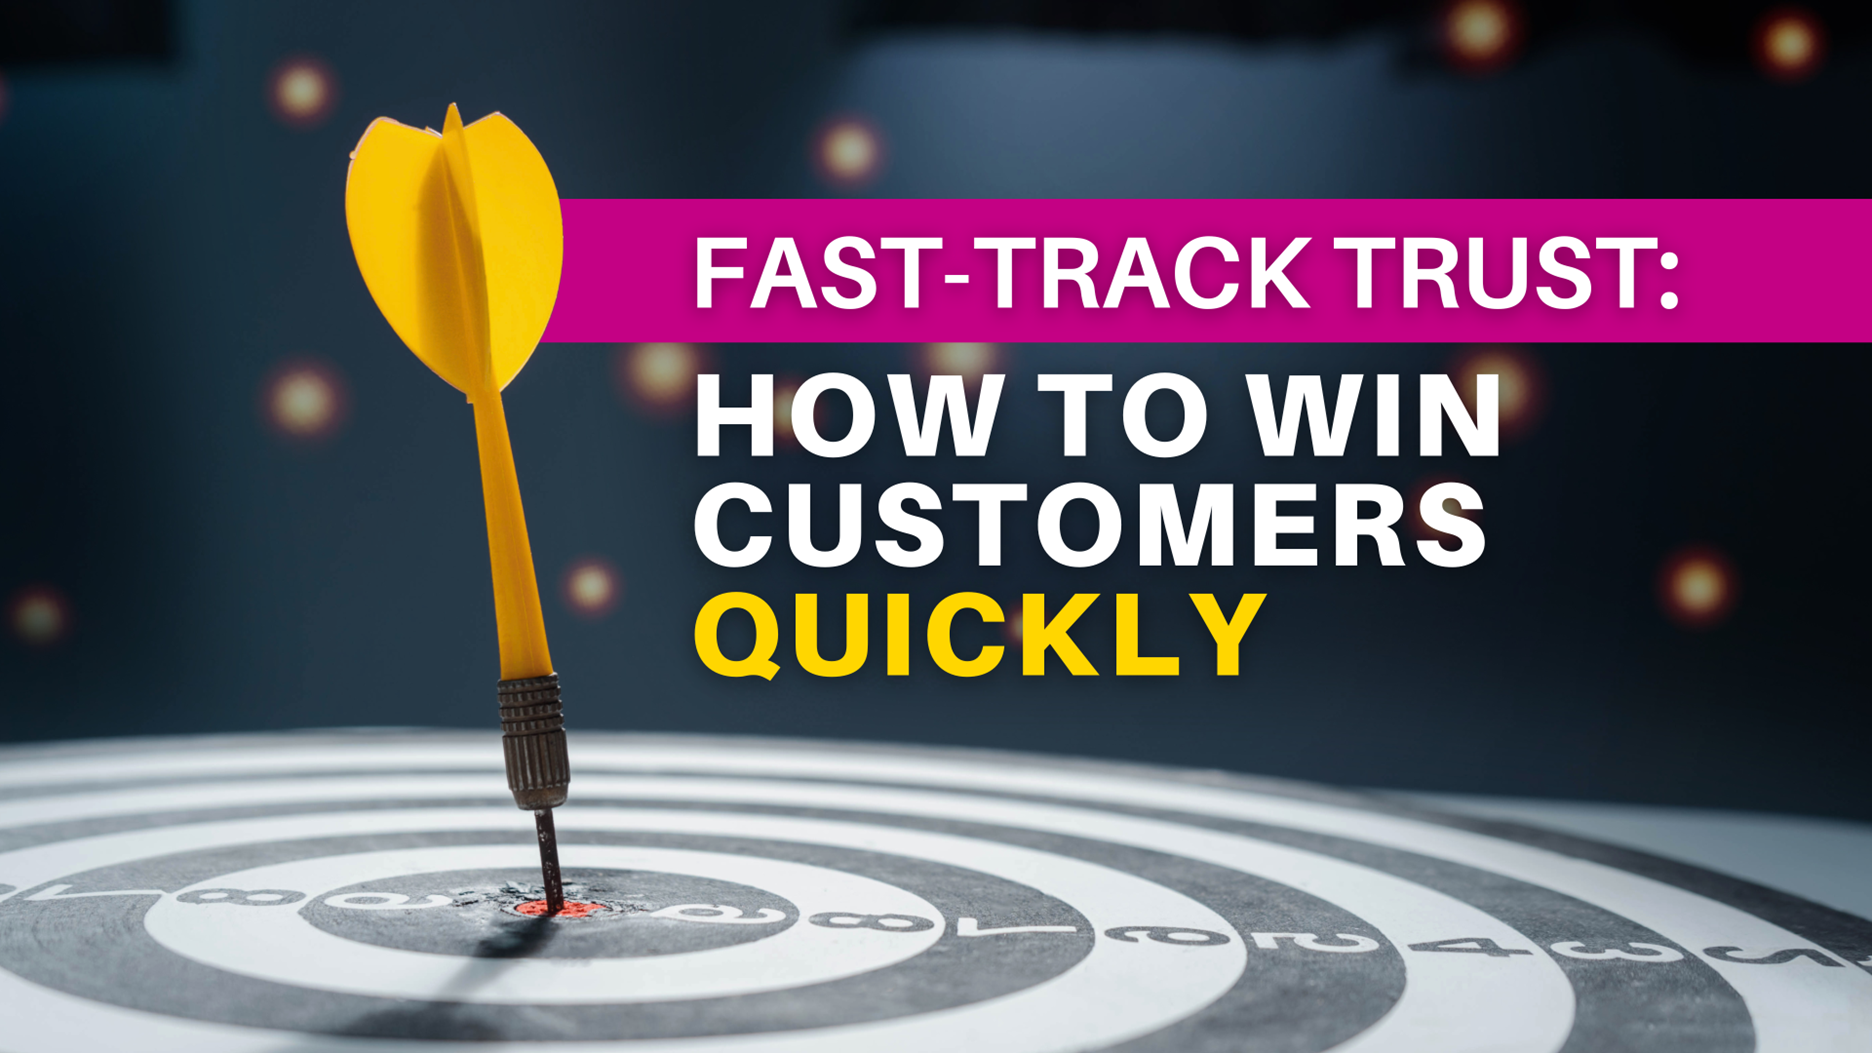 Image for Fast-Track Trust: How to Win Customers Quickly